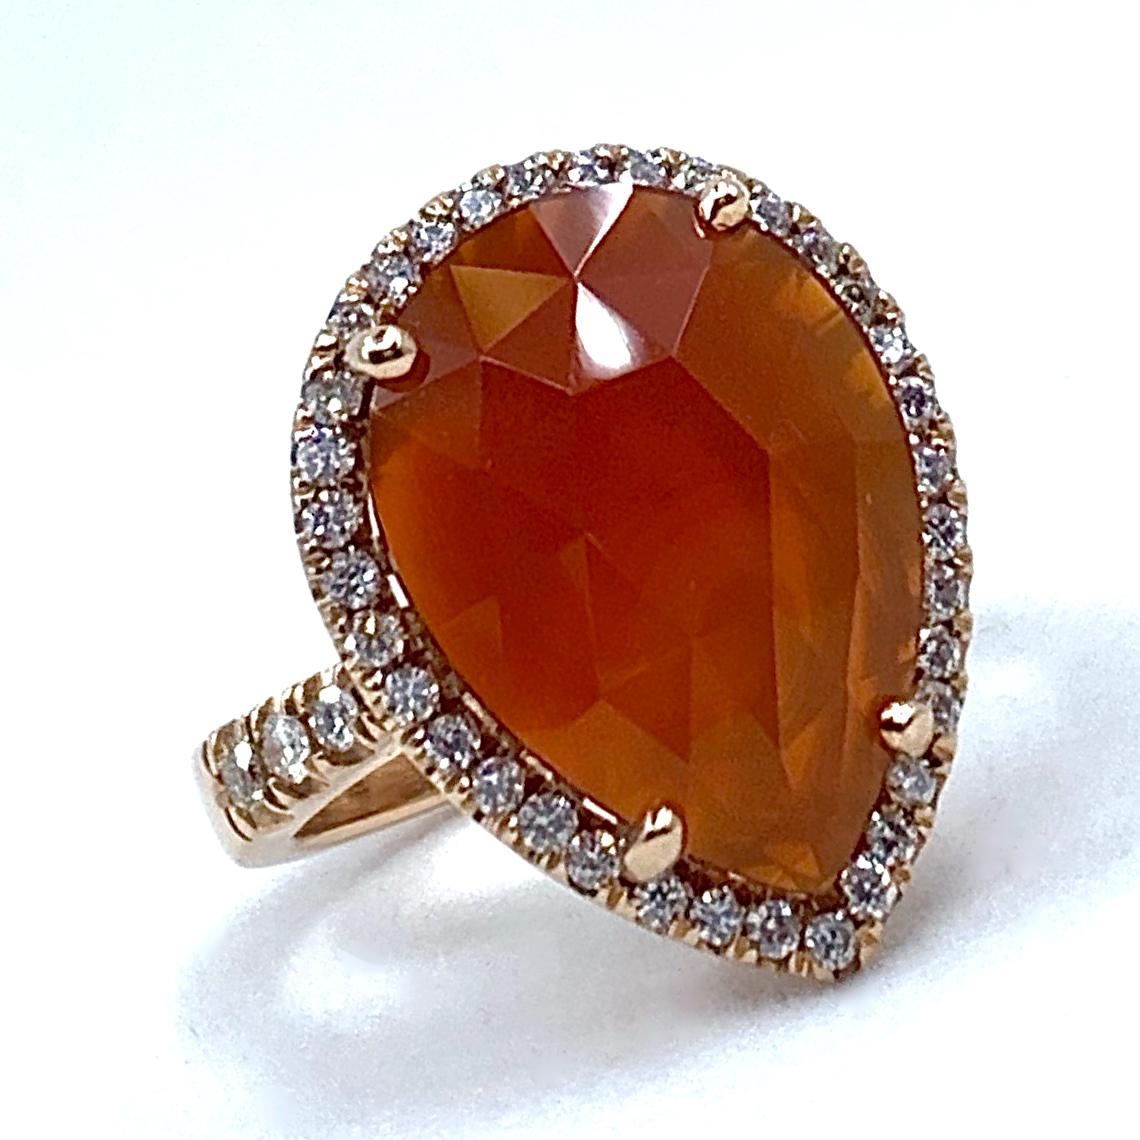 This one-of-a-kind ring was designed, set and finished here in our shop by Eytan Brandes.

A large, slightly translucent pear-shaped slice of faceted carnelian is prong-set in a high basket and surrounded by 34 pavé-set diamonds.  

Four